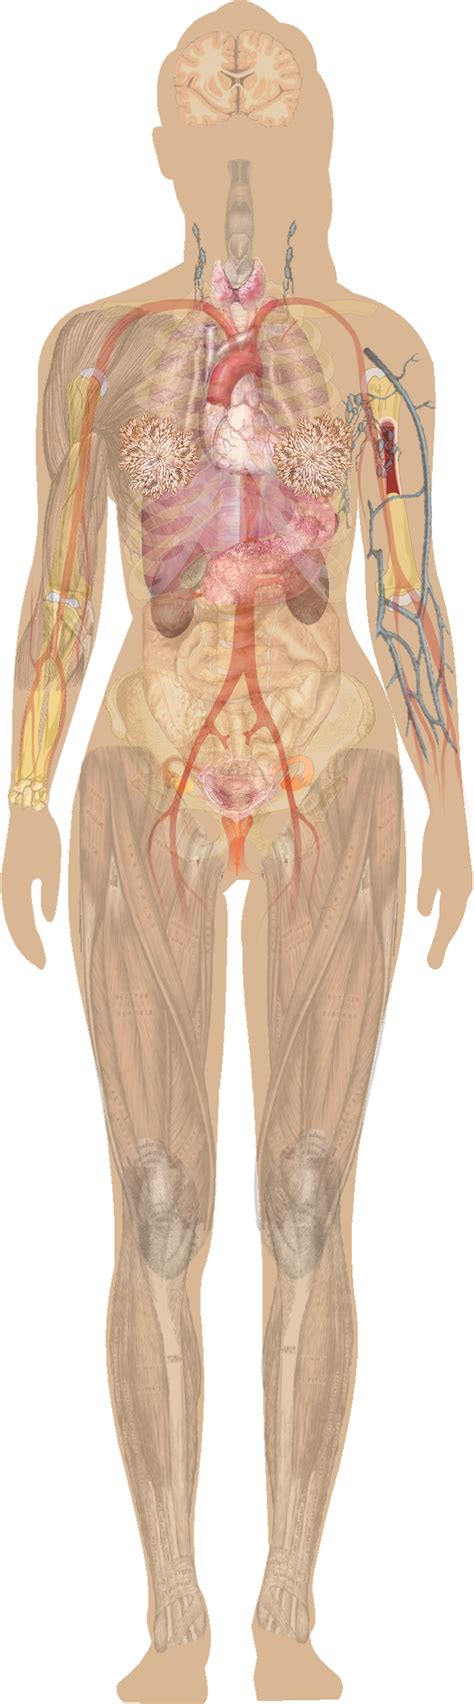 Download Female Shadow Anatomy Without Labels - Human Body Without Labels Clipart Png Download ...